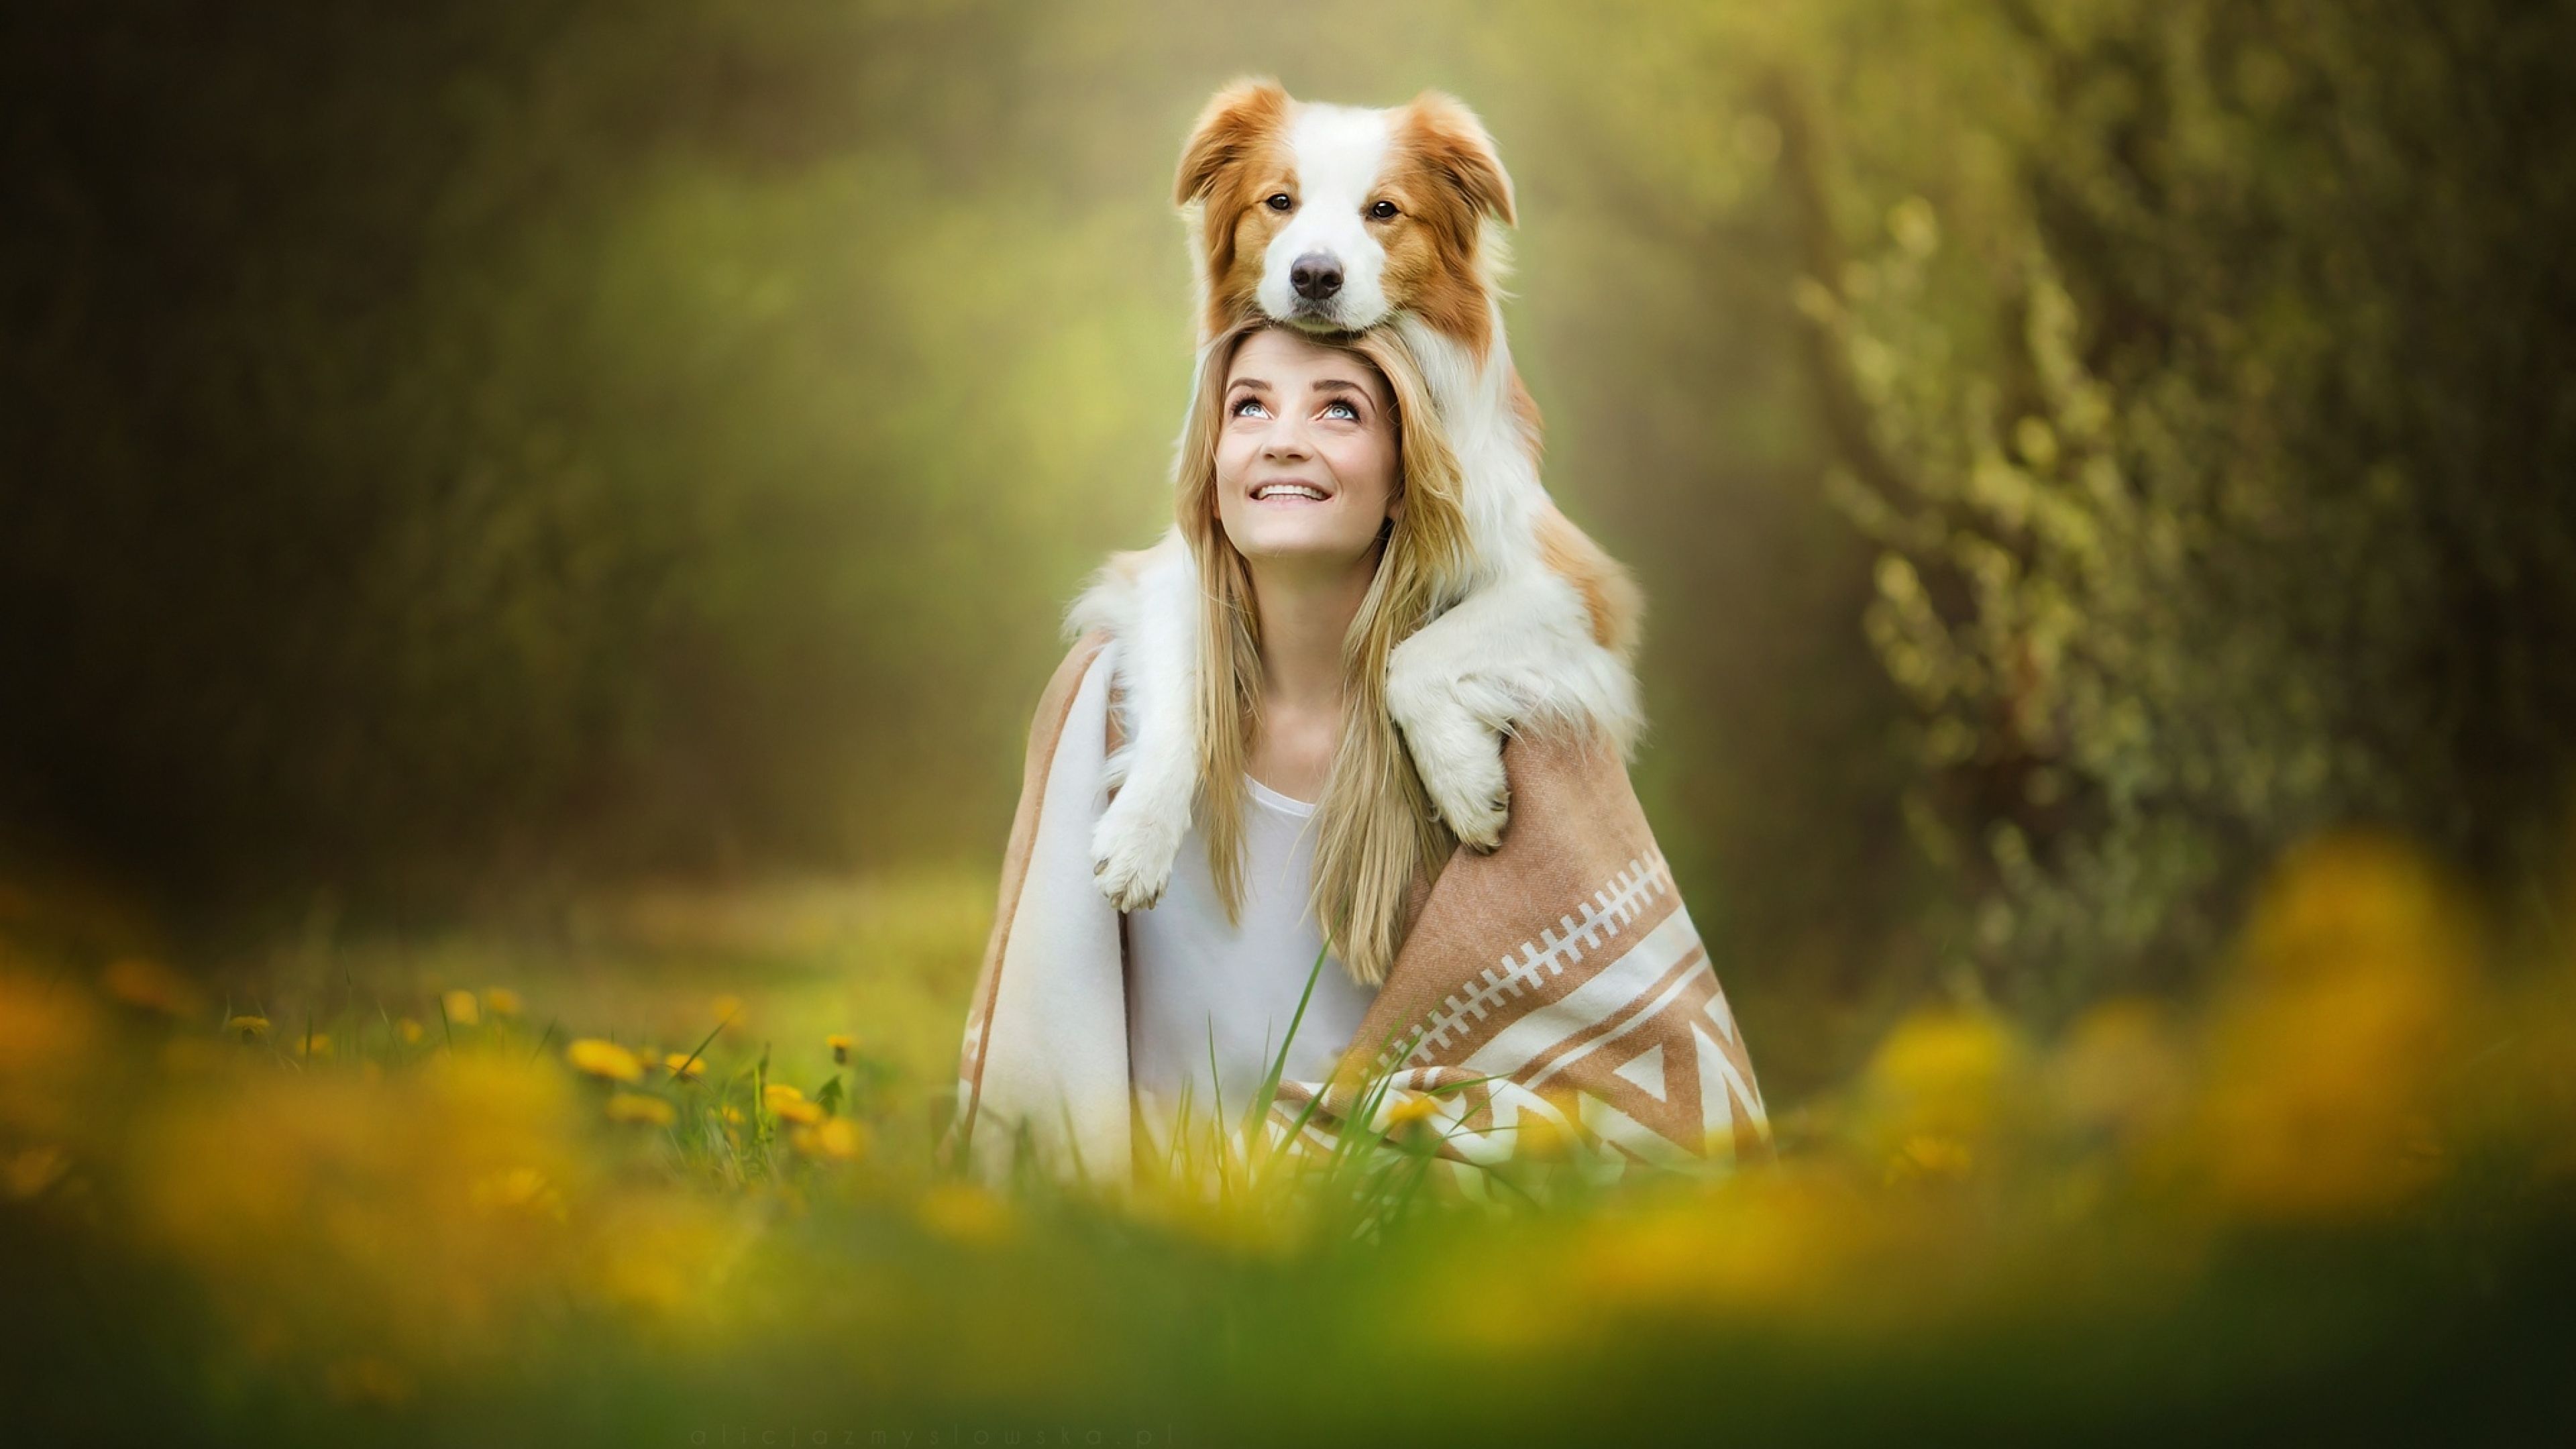 Cute Girl With Dog 4K Wallpaper, HD Animals 4K Wallpaper, Image, Photo and Background